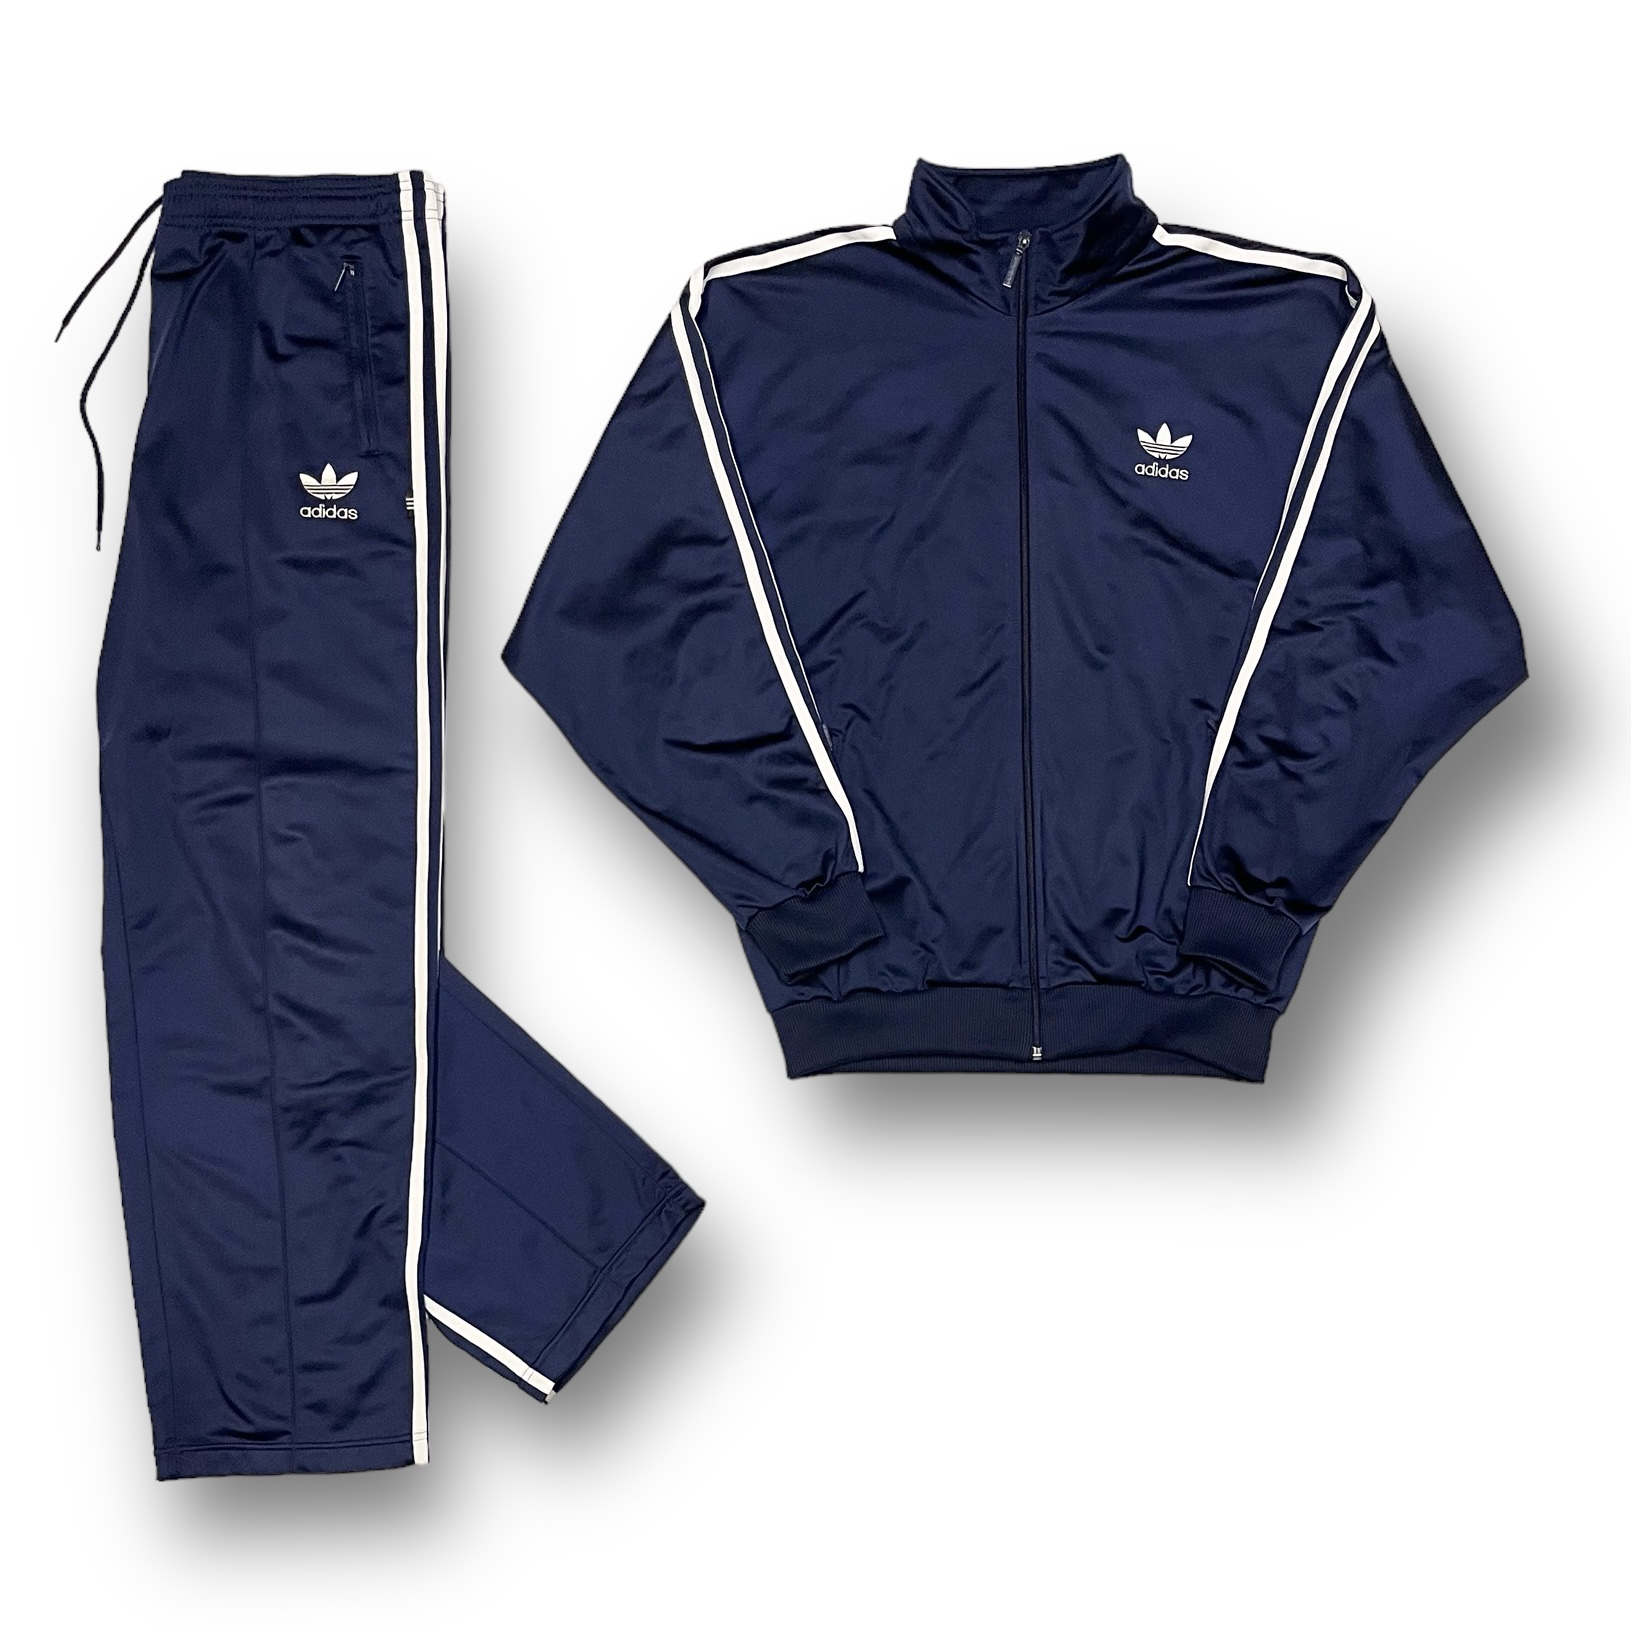 Adidas tracksuit - Lowkey Archives